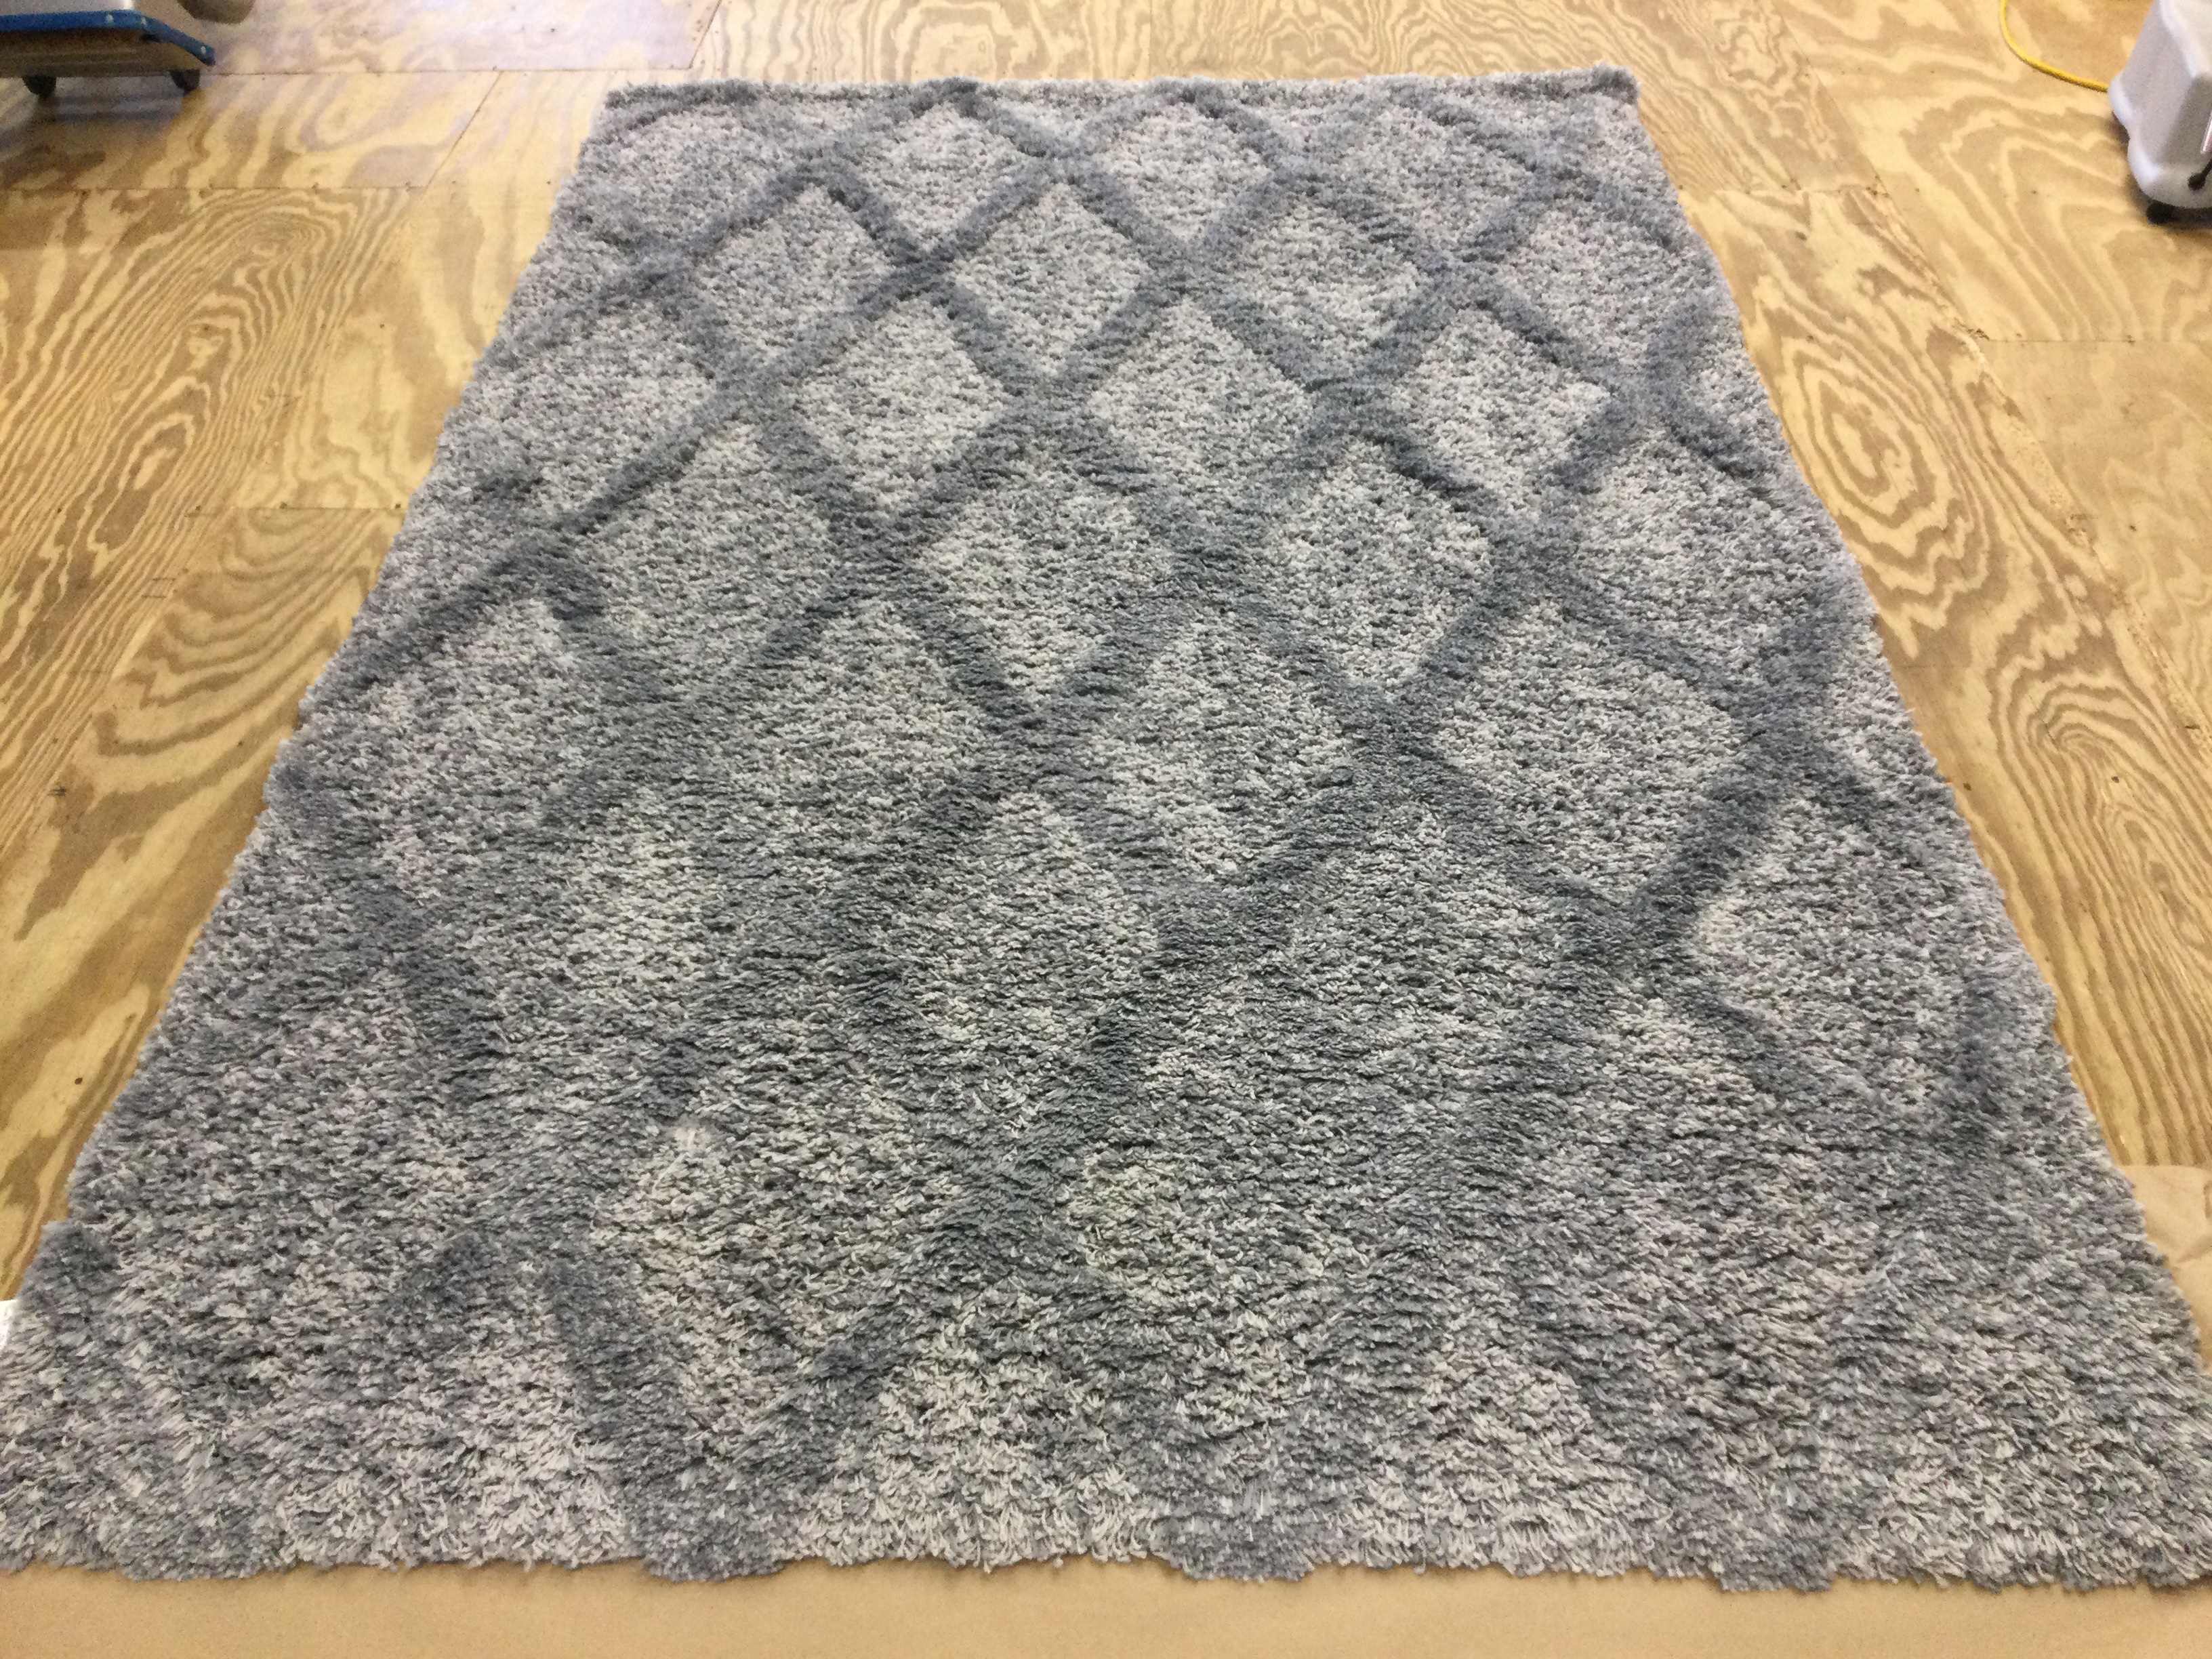 Car Wash Rug After Cleaning